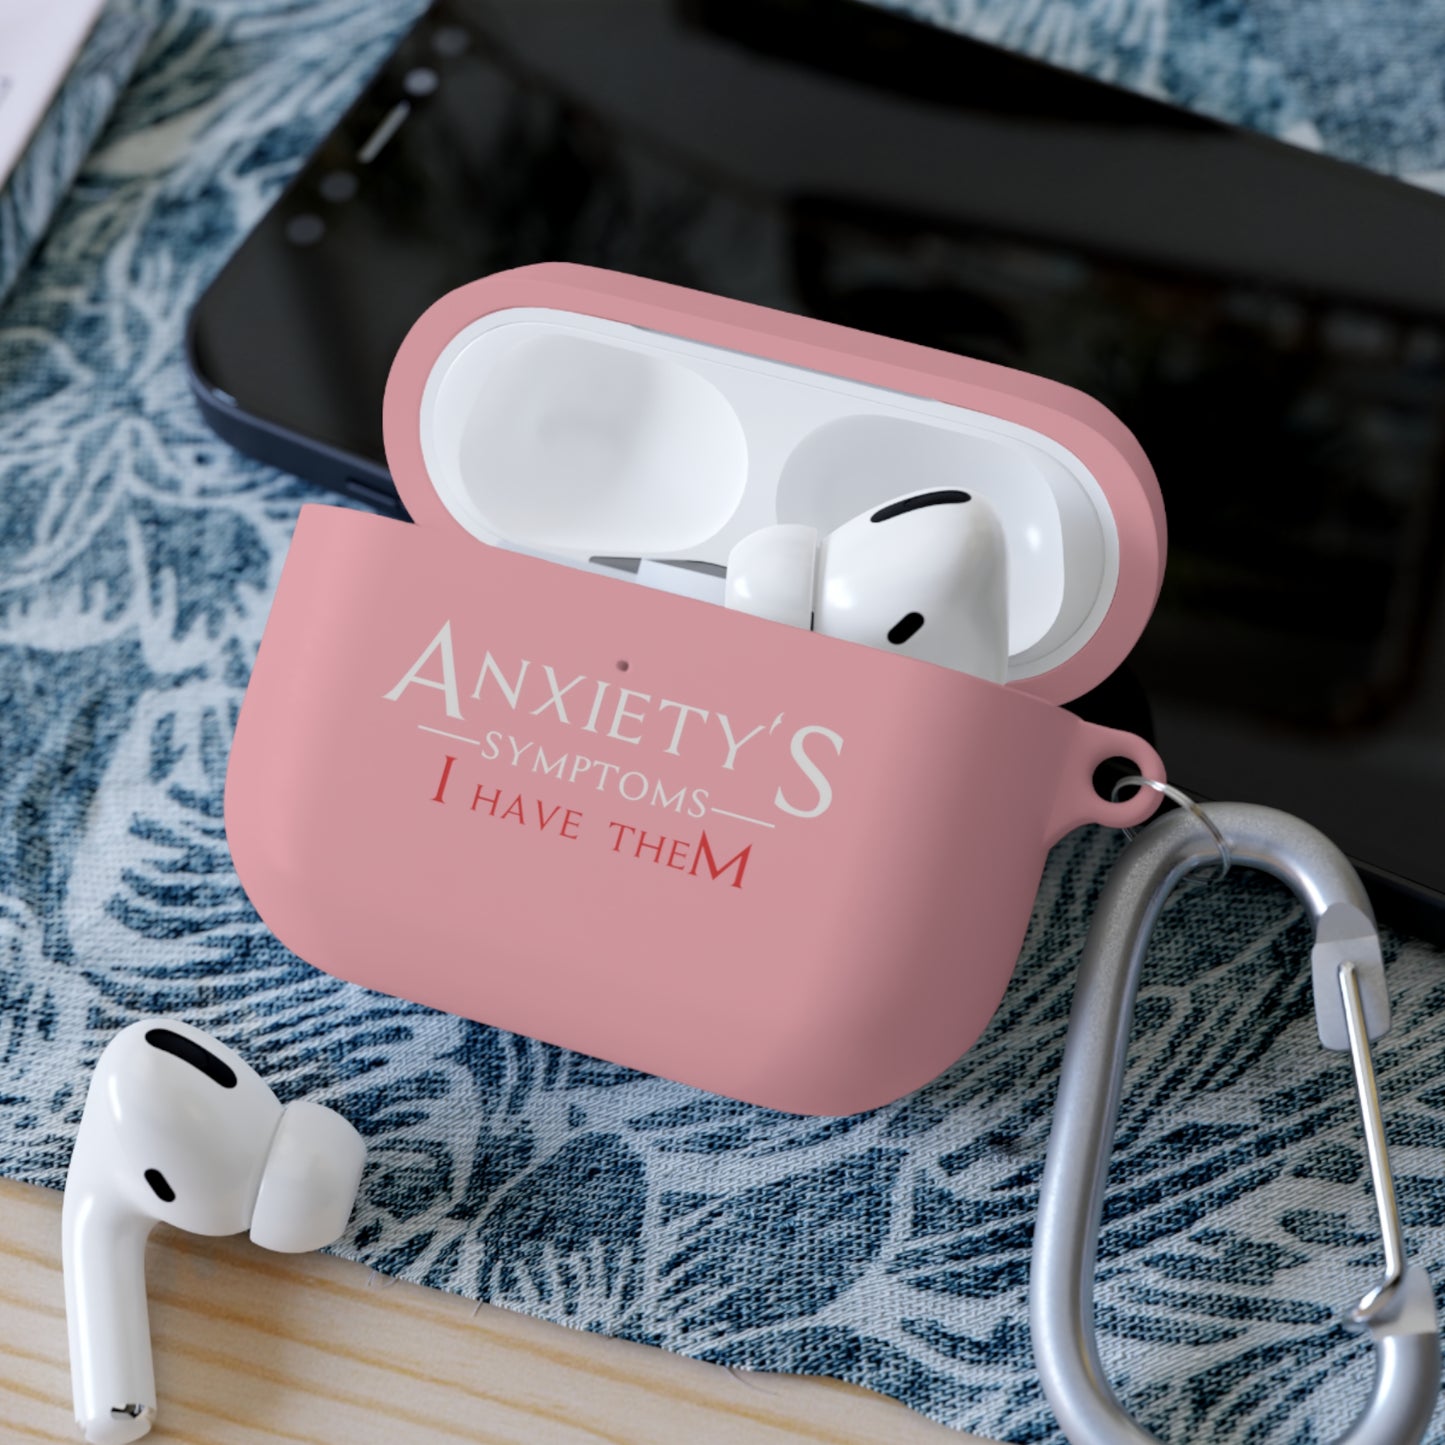 AirPods / AirPods Pro Case Cover - Anxiety's Symptons